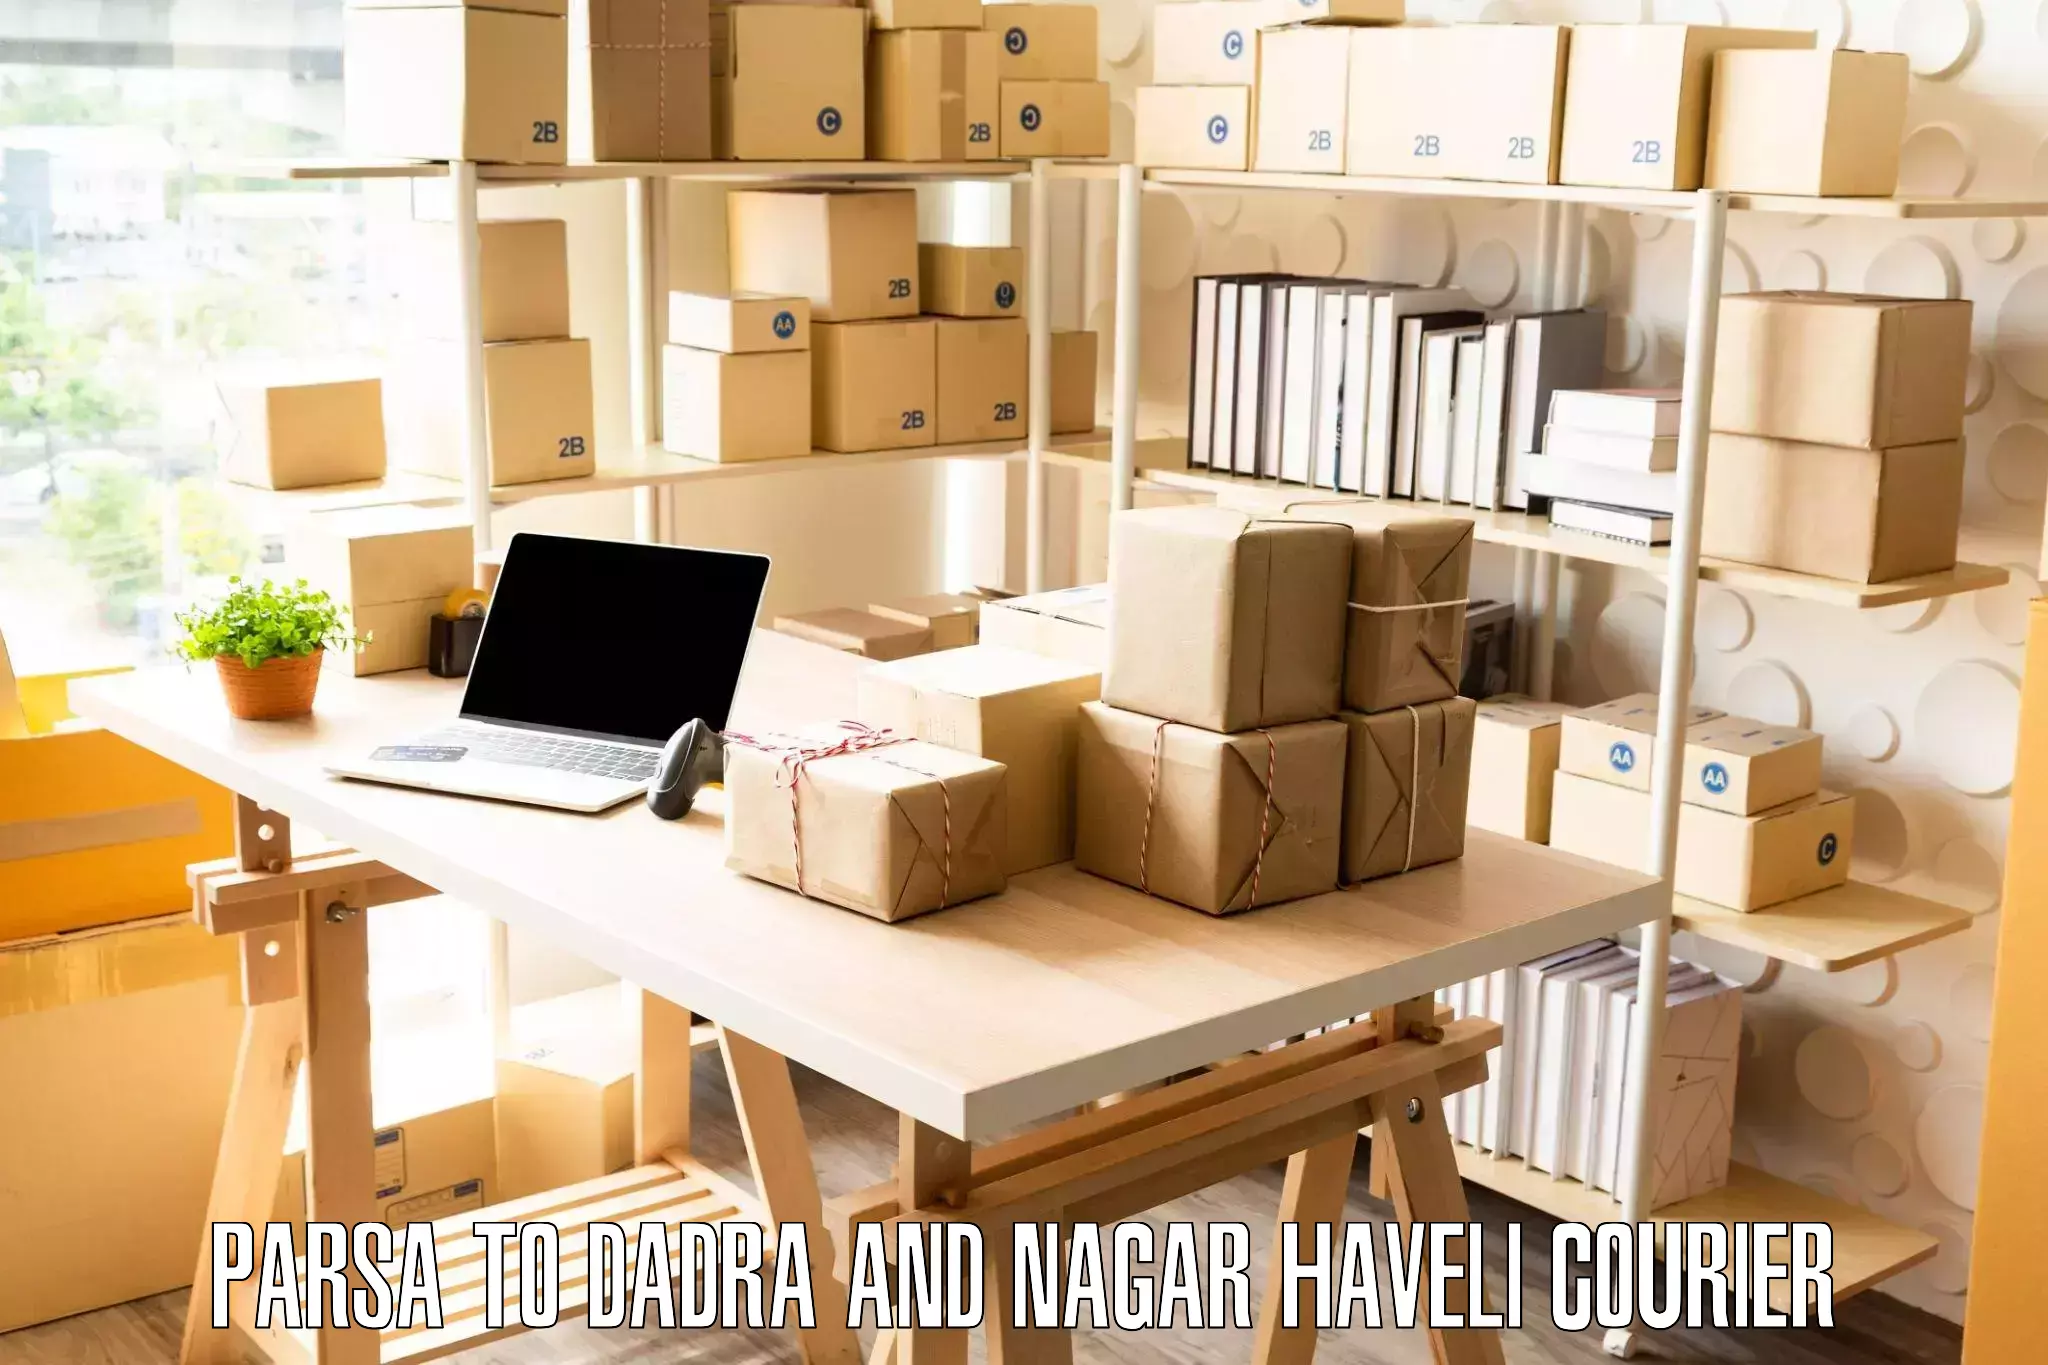 Efficient moving services in Parsa to Dadra and Nagar Haveli